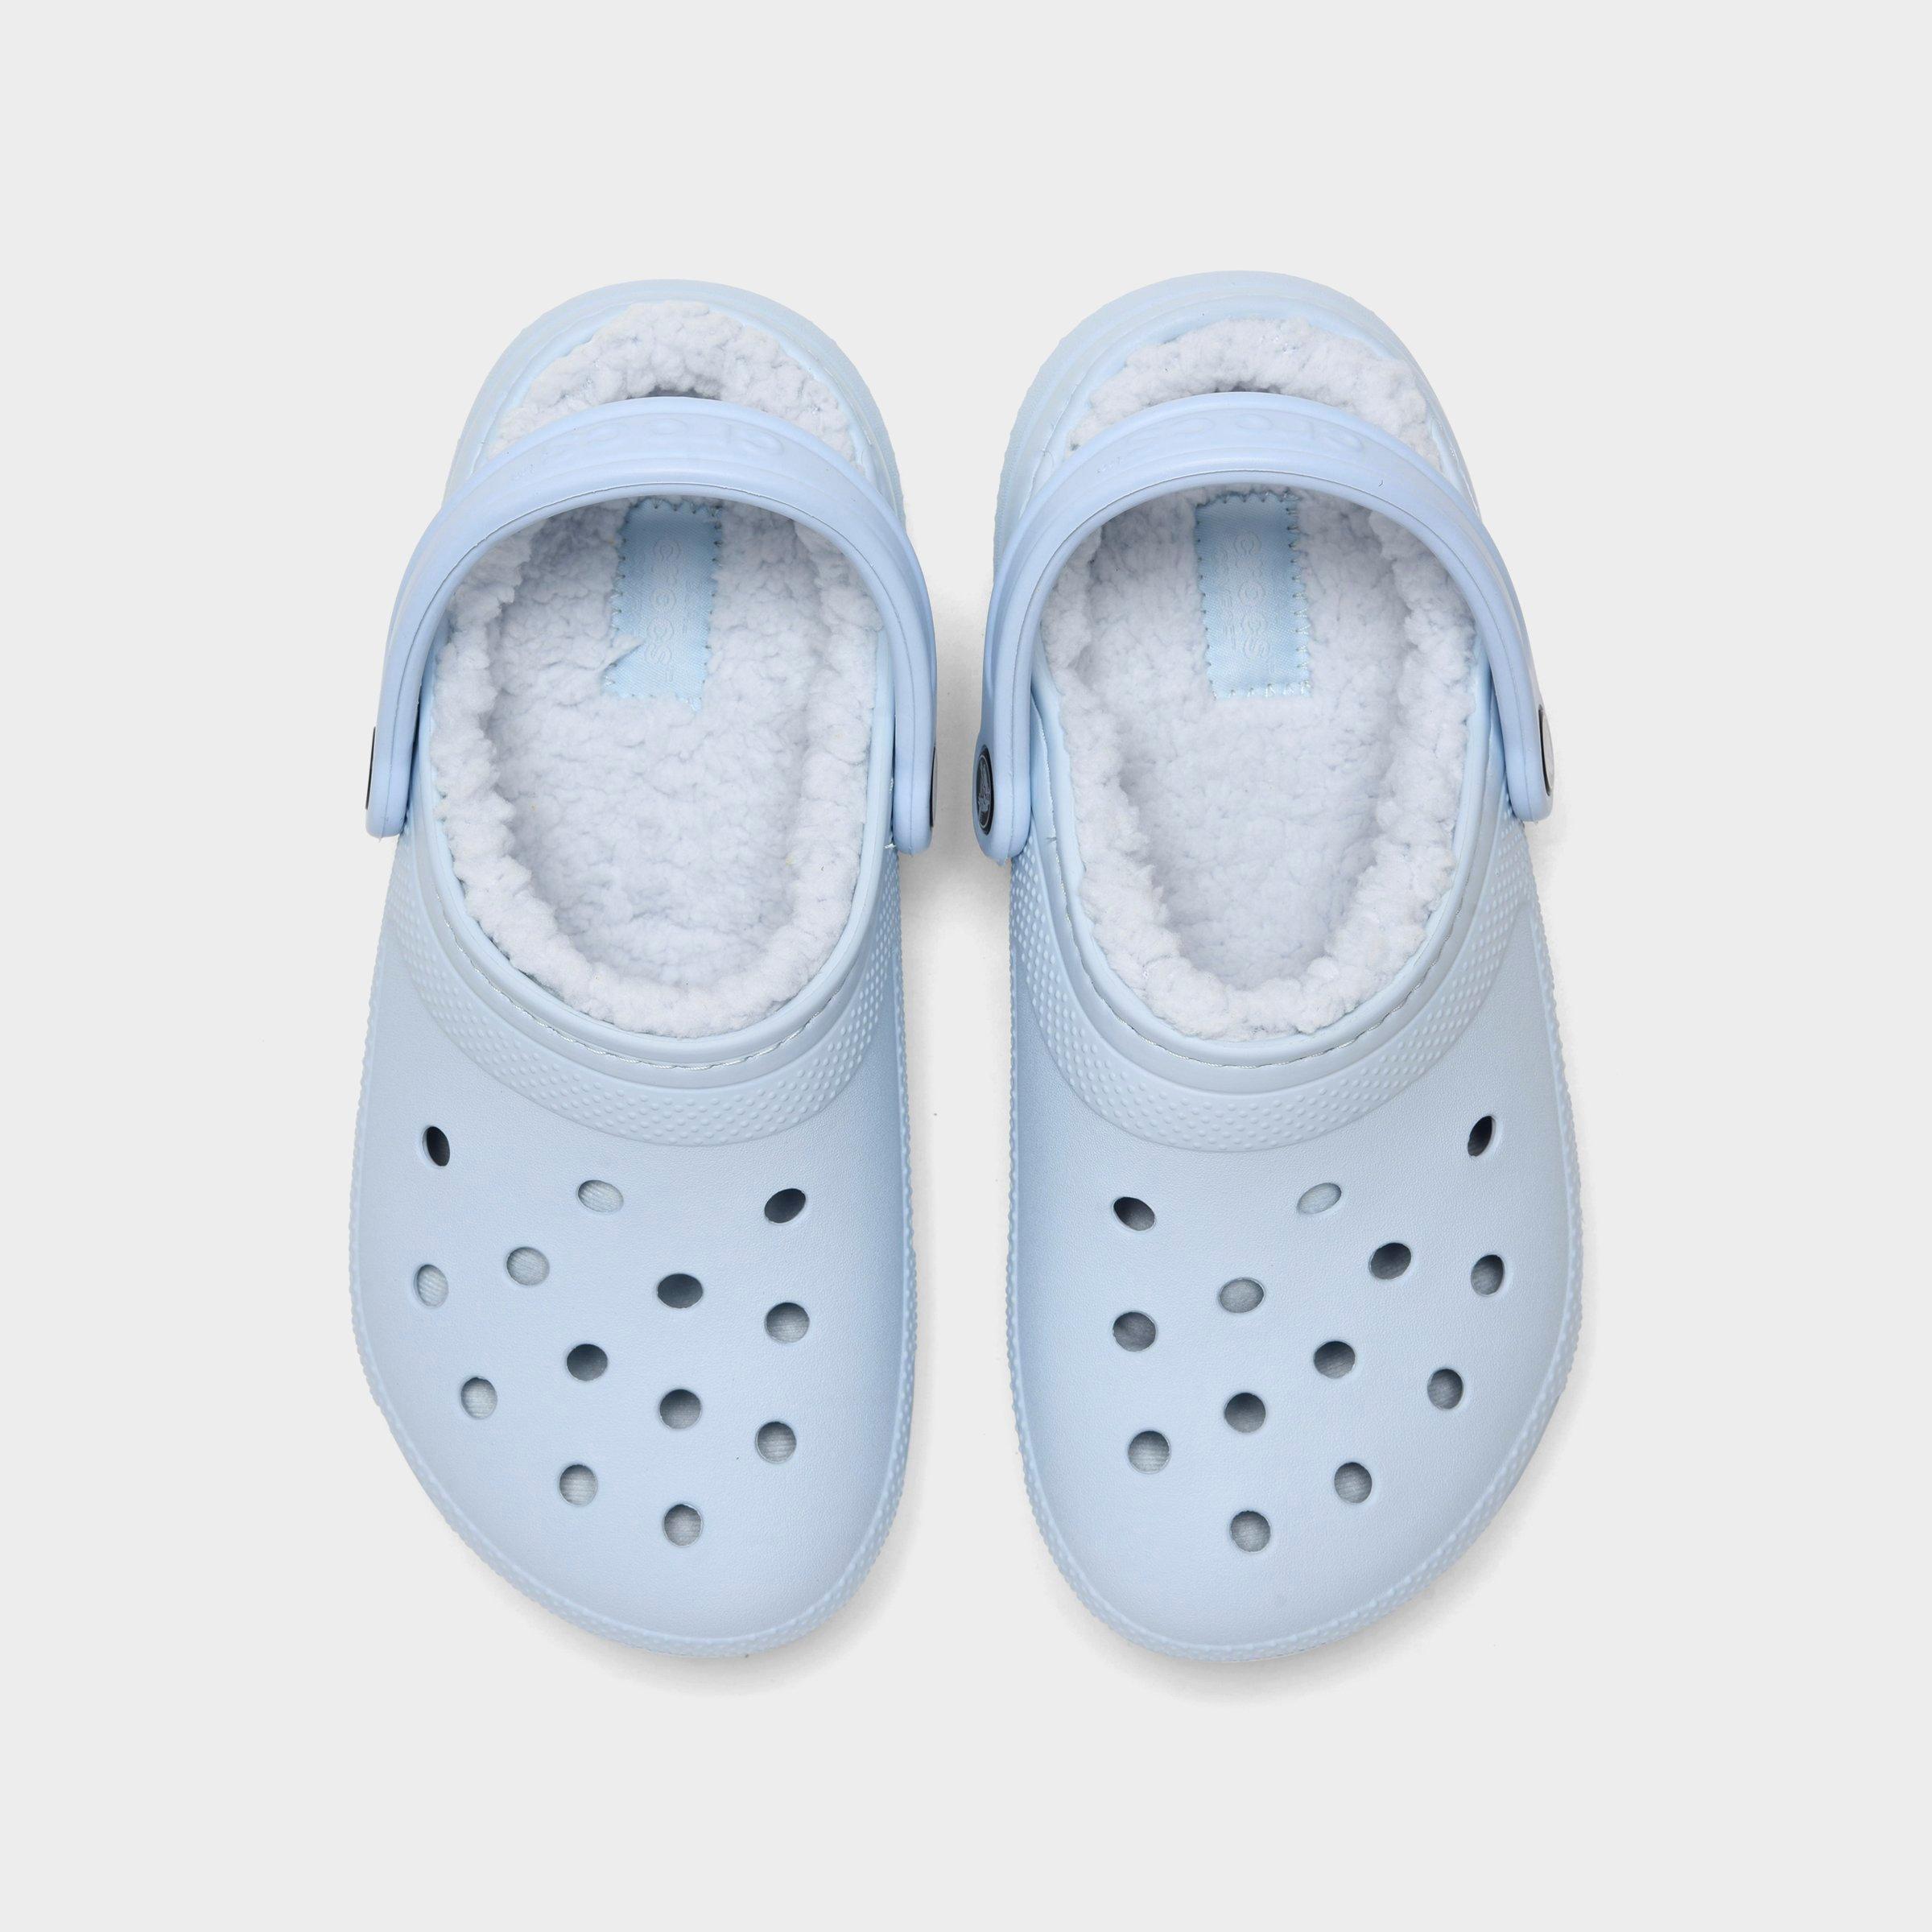 mineral blue crocs with fur